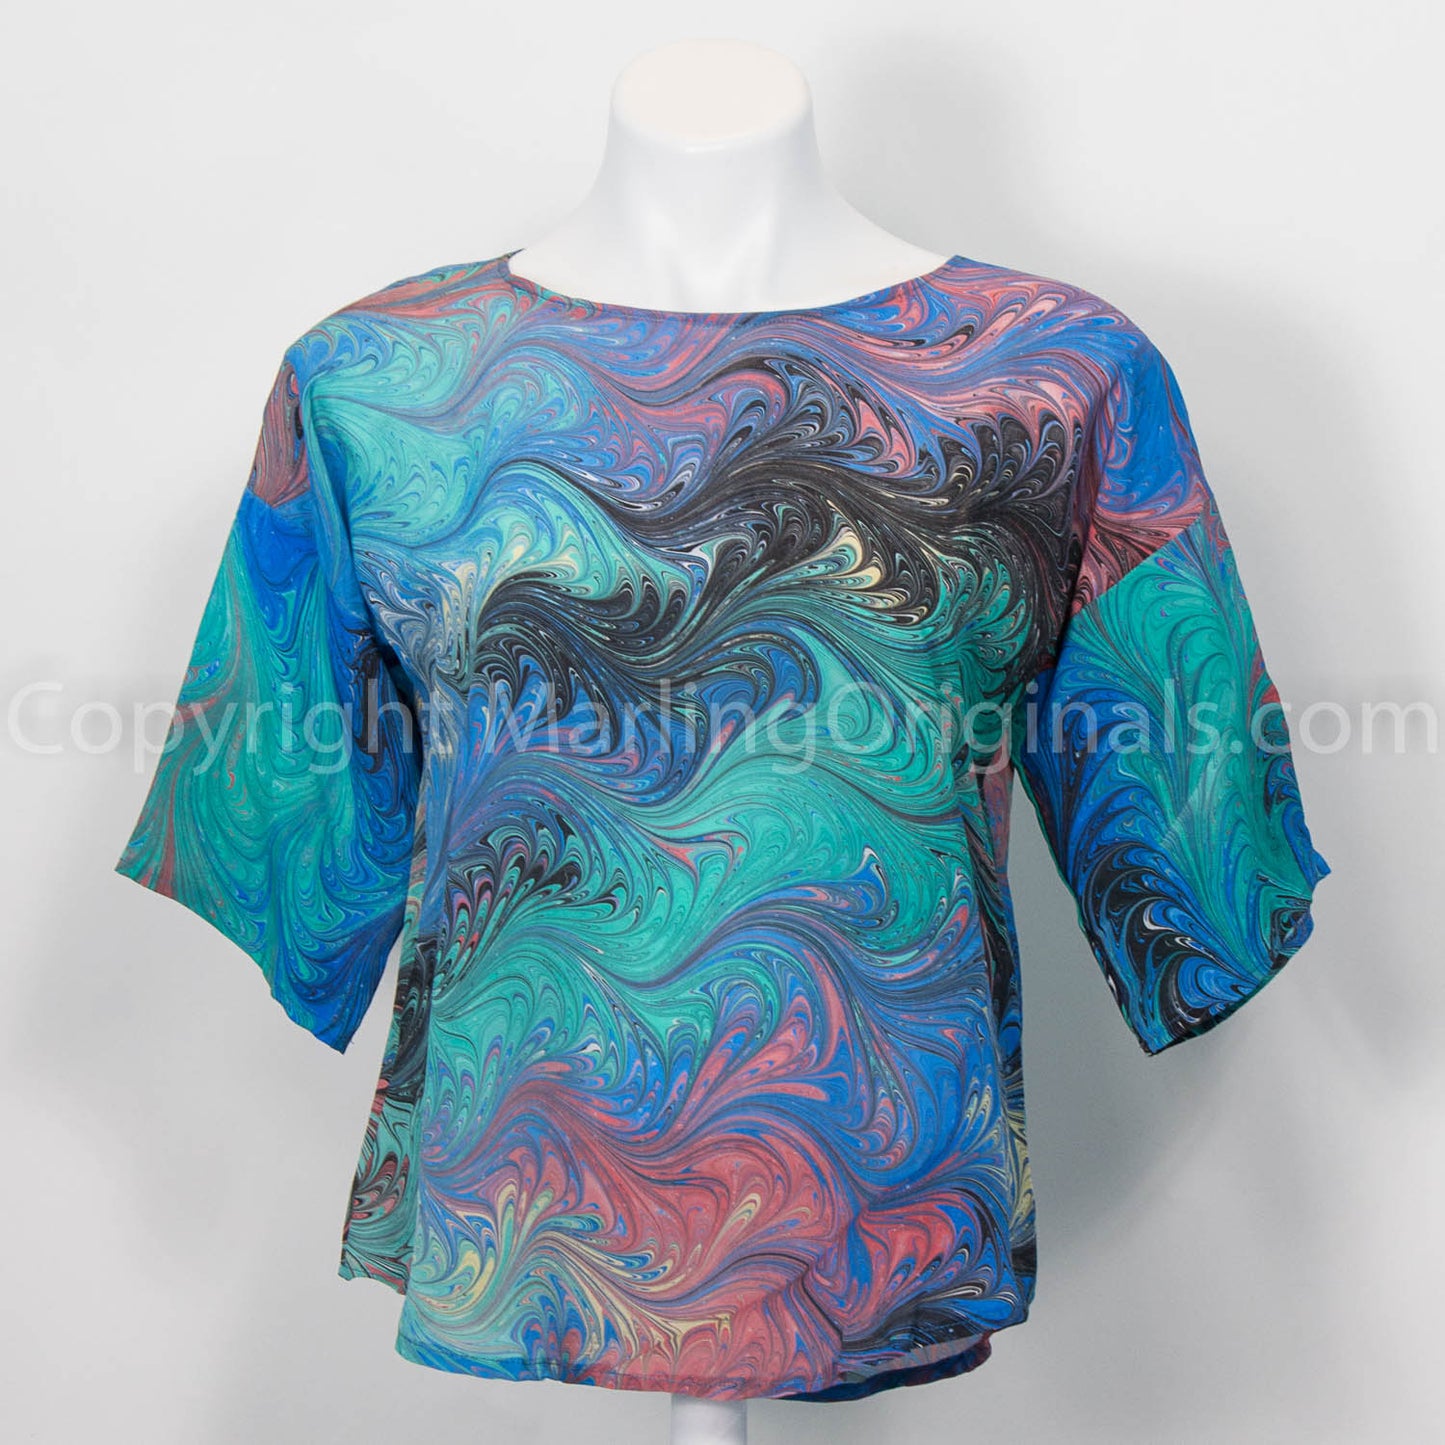 Silk top in green, blue, red and black marbled tones.  Round neck with half sleeve and curved hem.